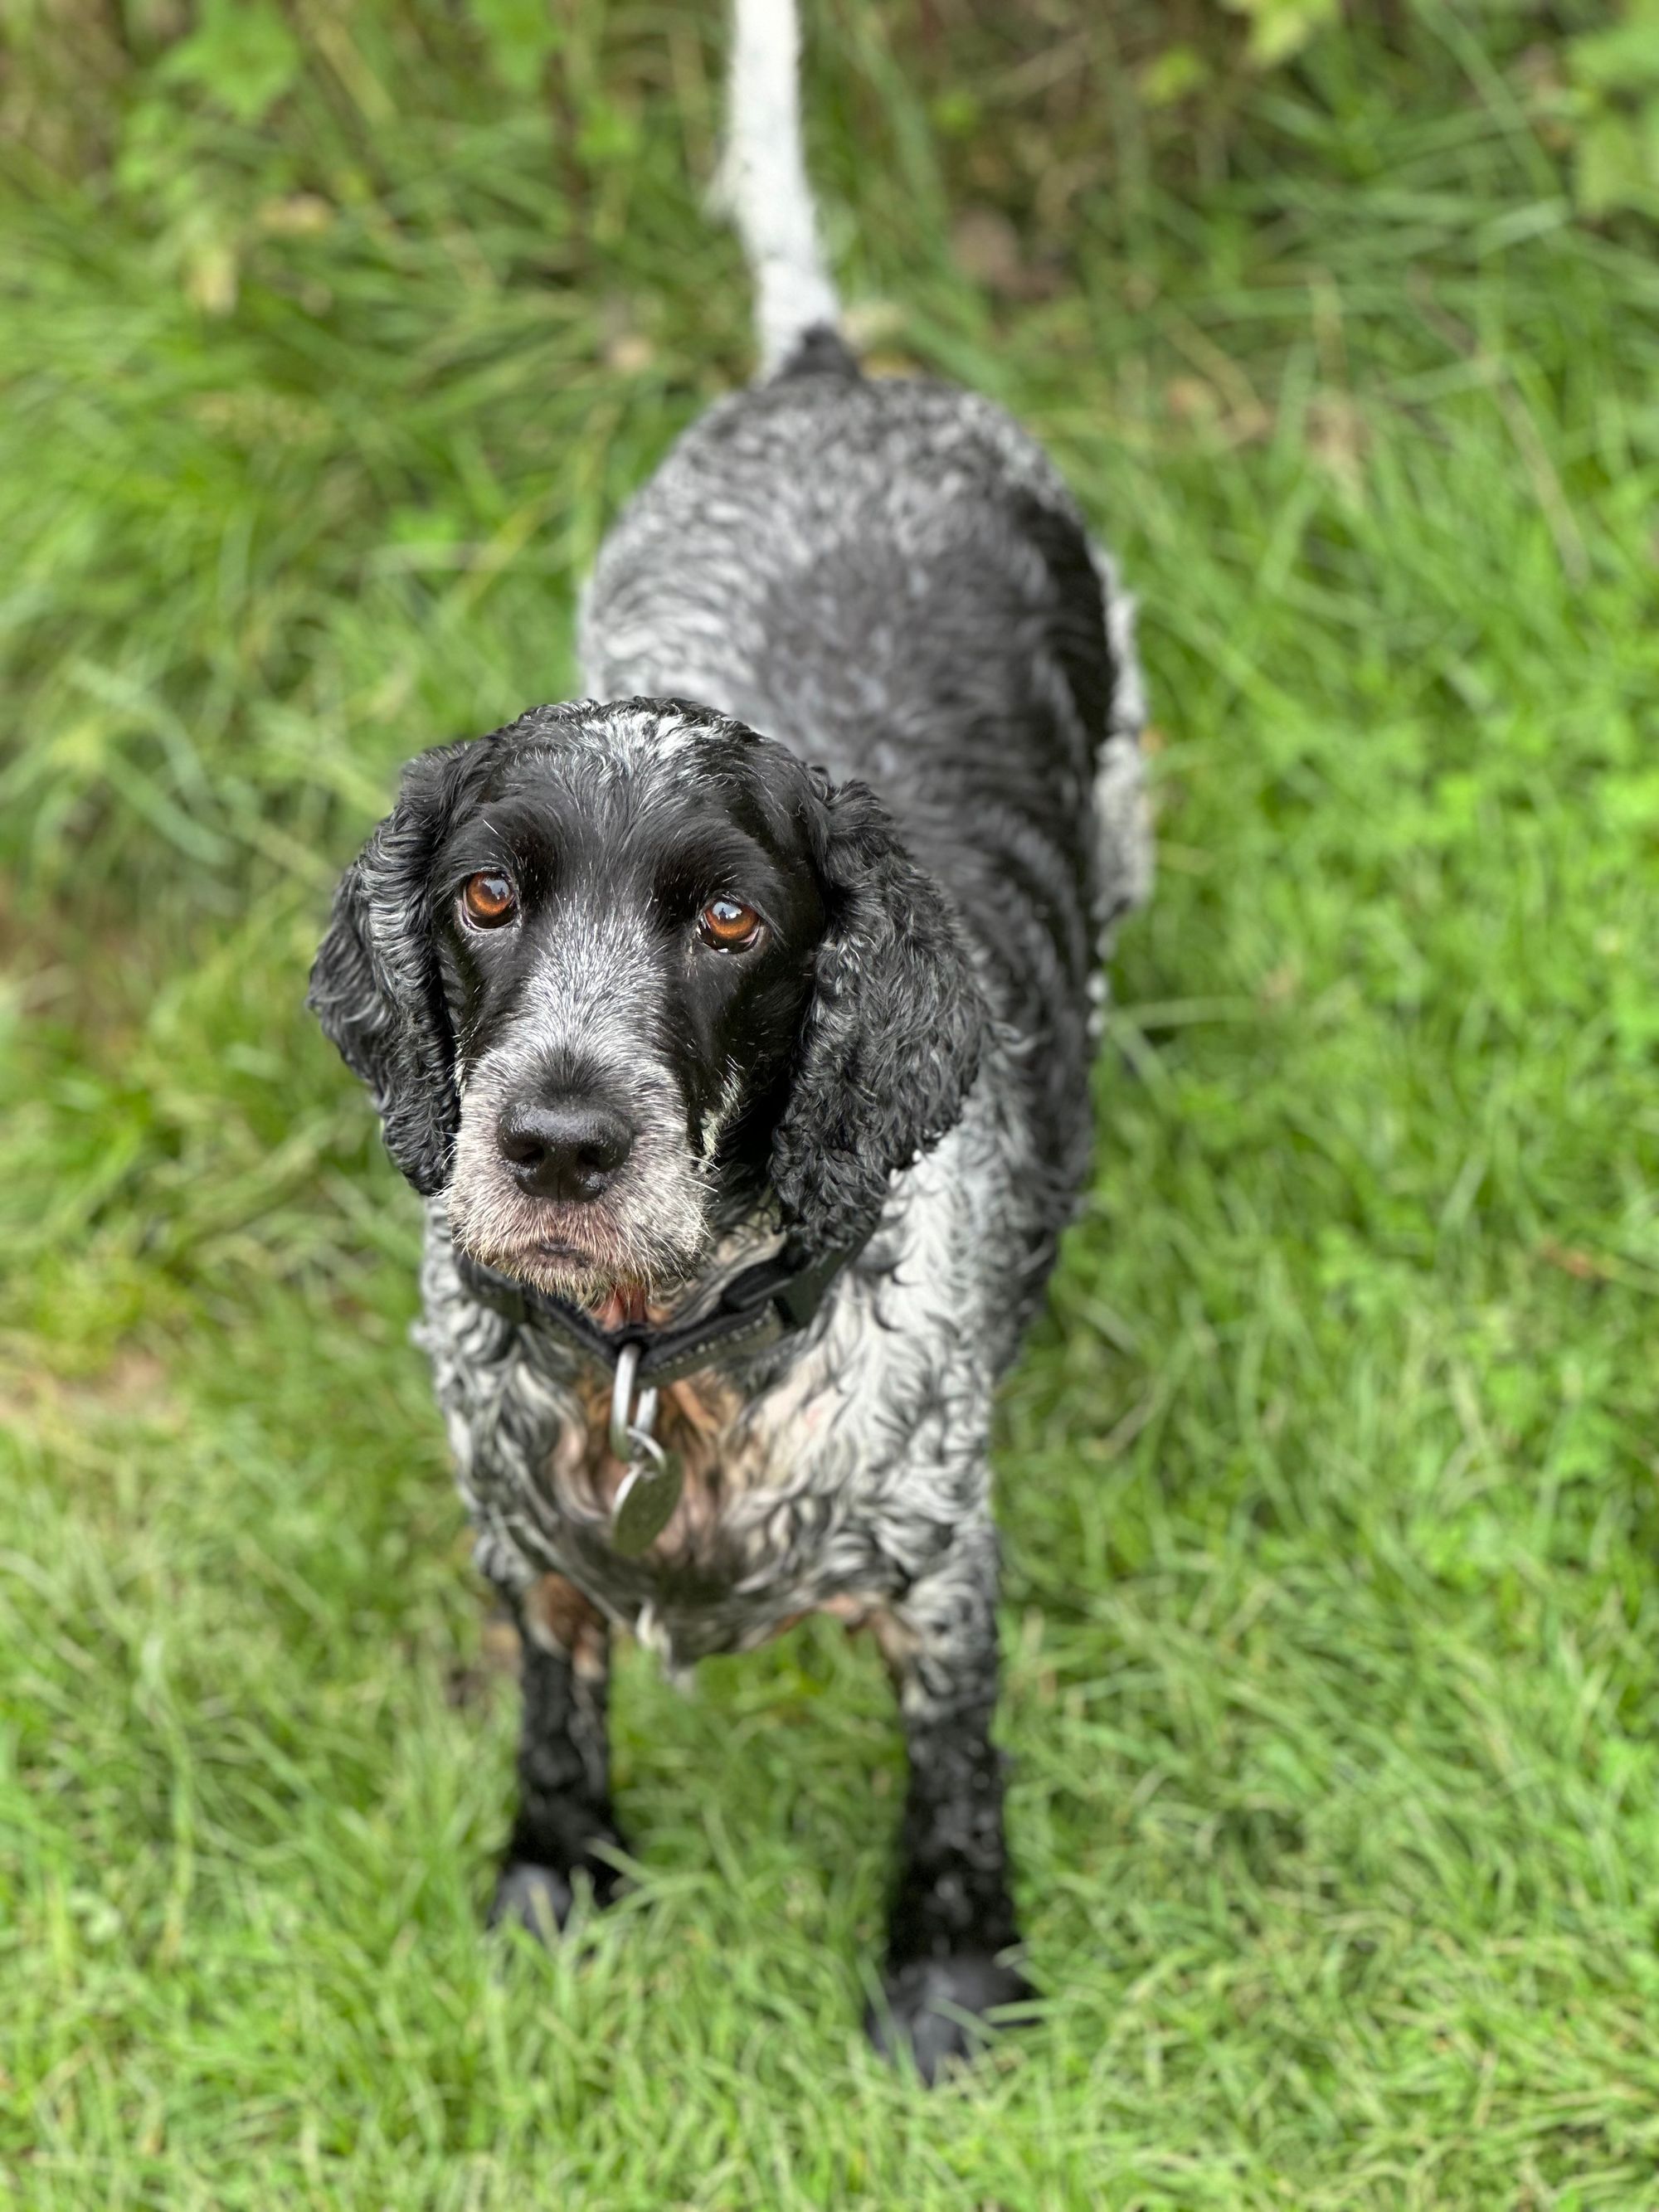 A wet blue roan (black and white) cocker spaniel dog outside on the grass.